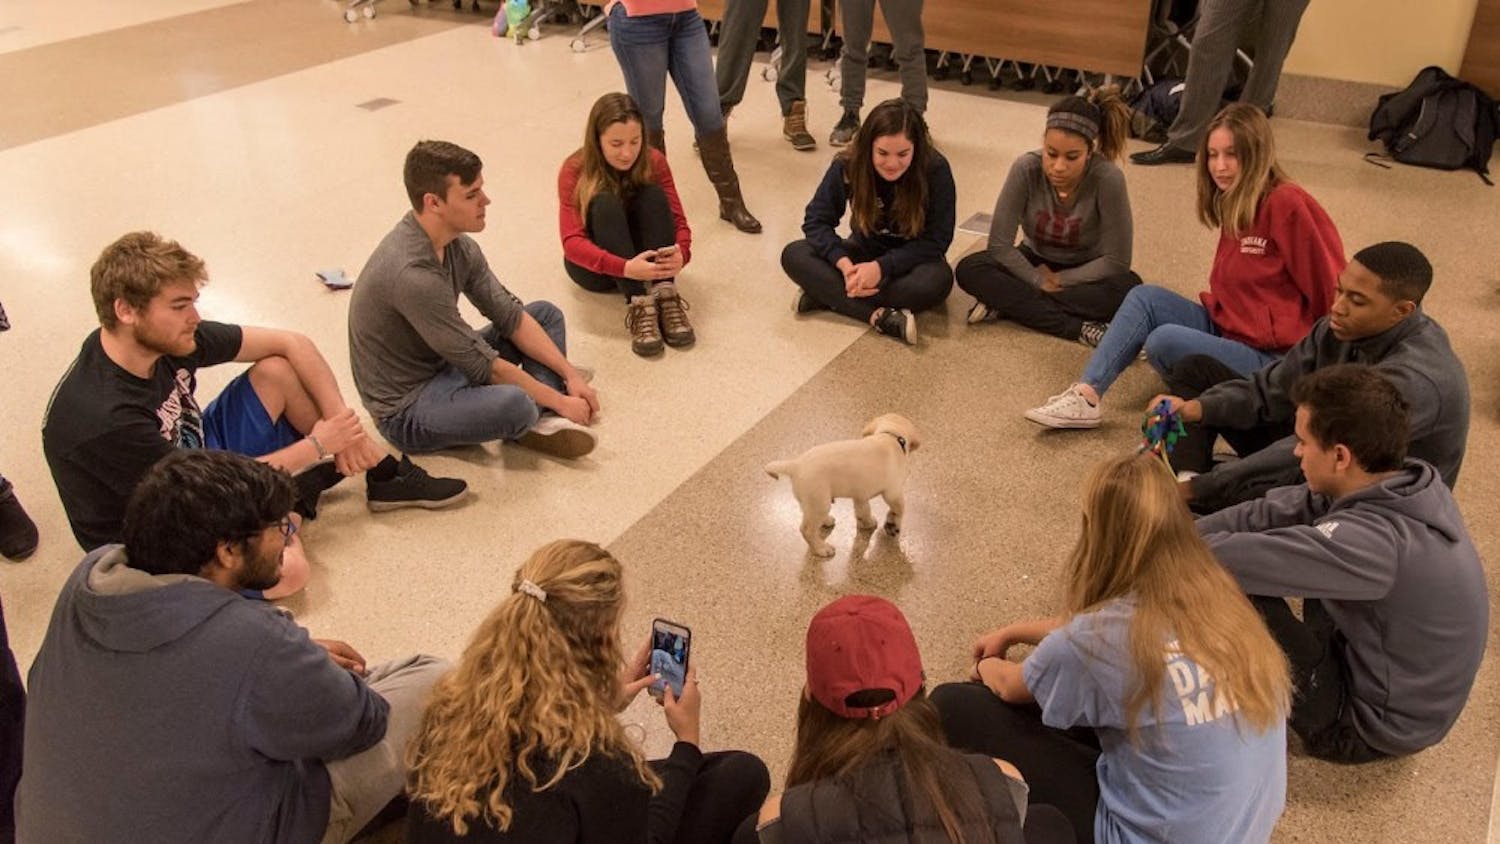 Members of the Indiana Canine Assistant Network participate in their Destress with Dogs event from the fall 2017 semester. The dogs were brought in to help students destress during finals week.